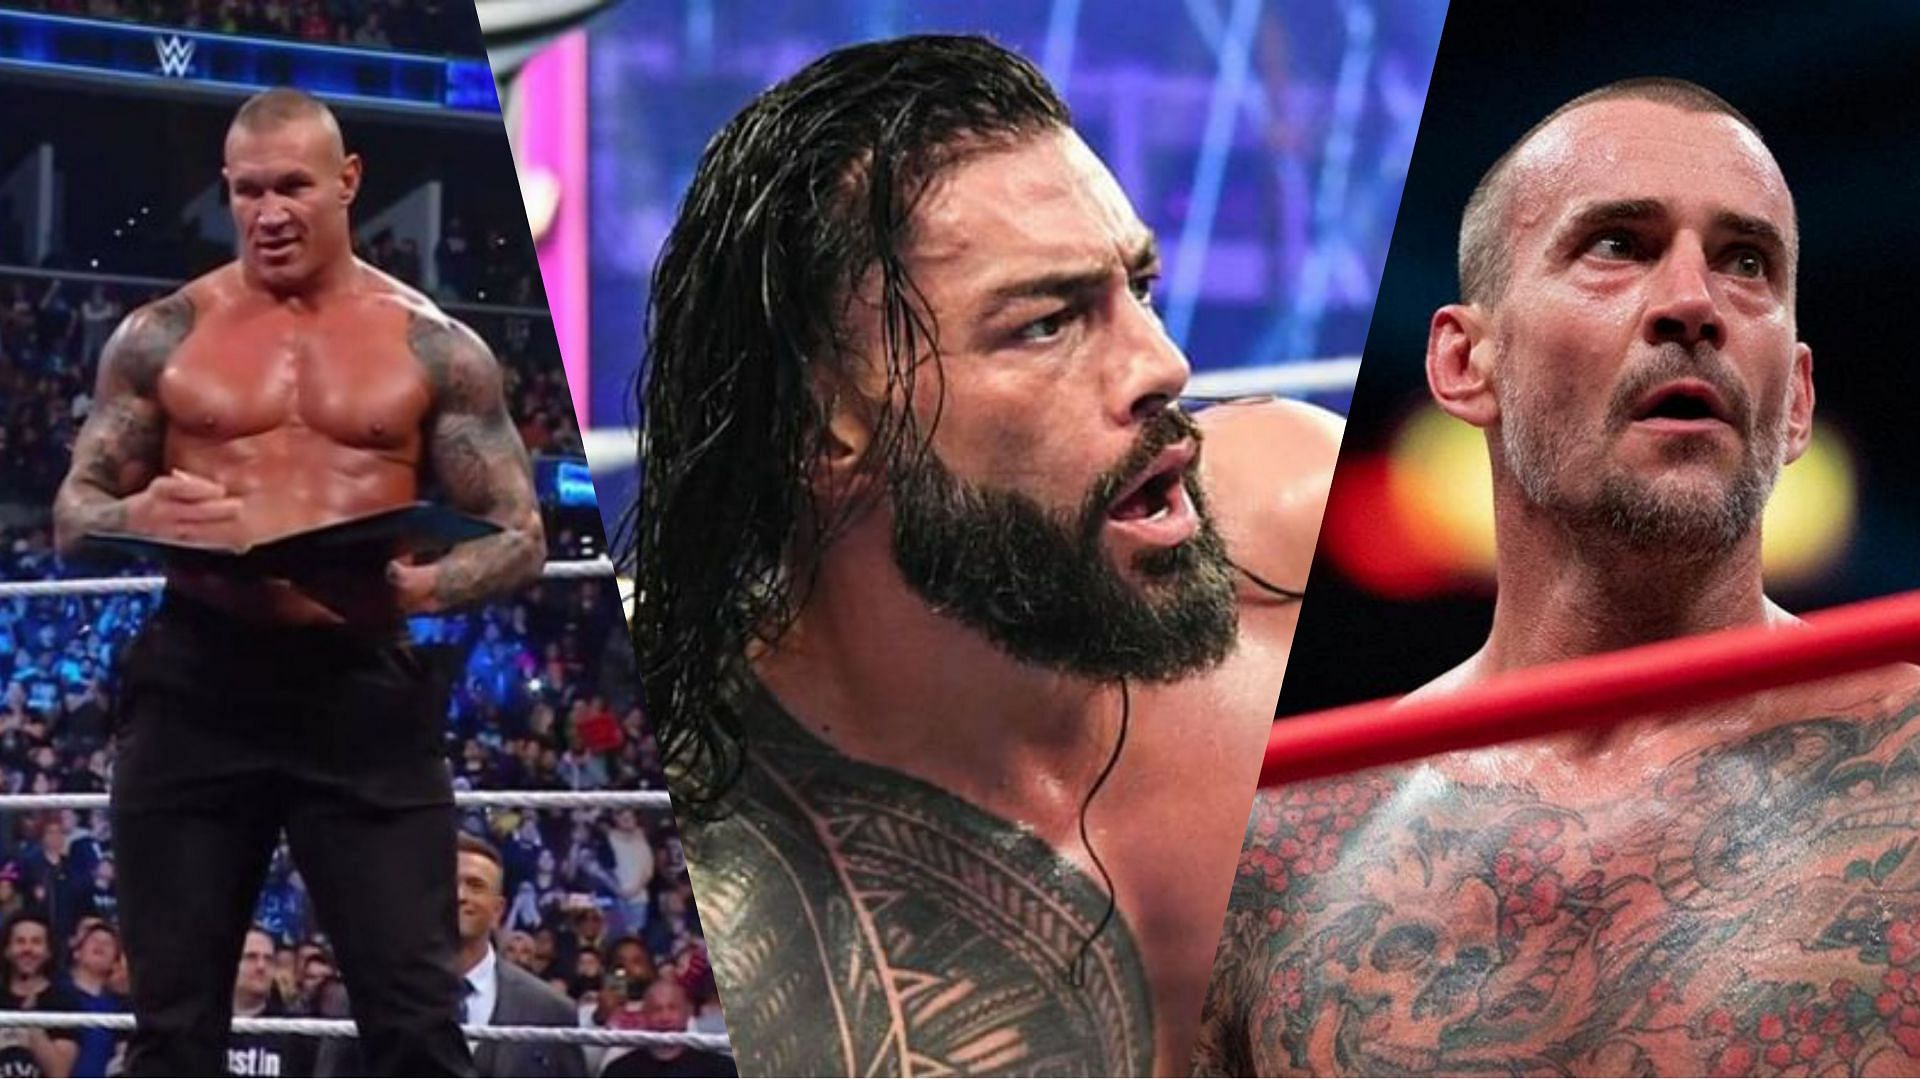 Randy Orton and CM Punk have teased going after Roman Reigns!